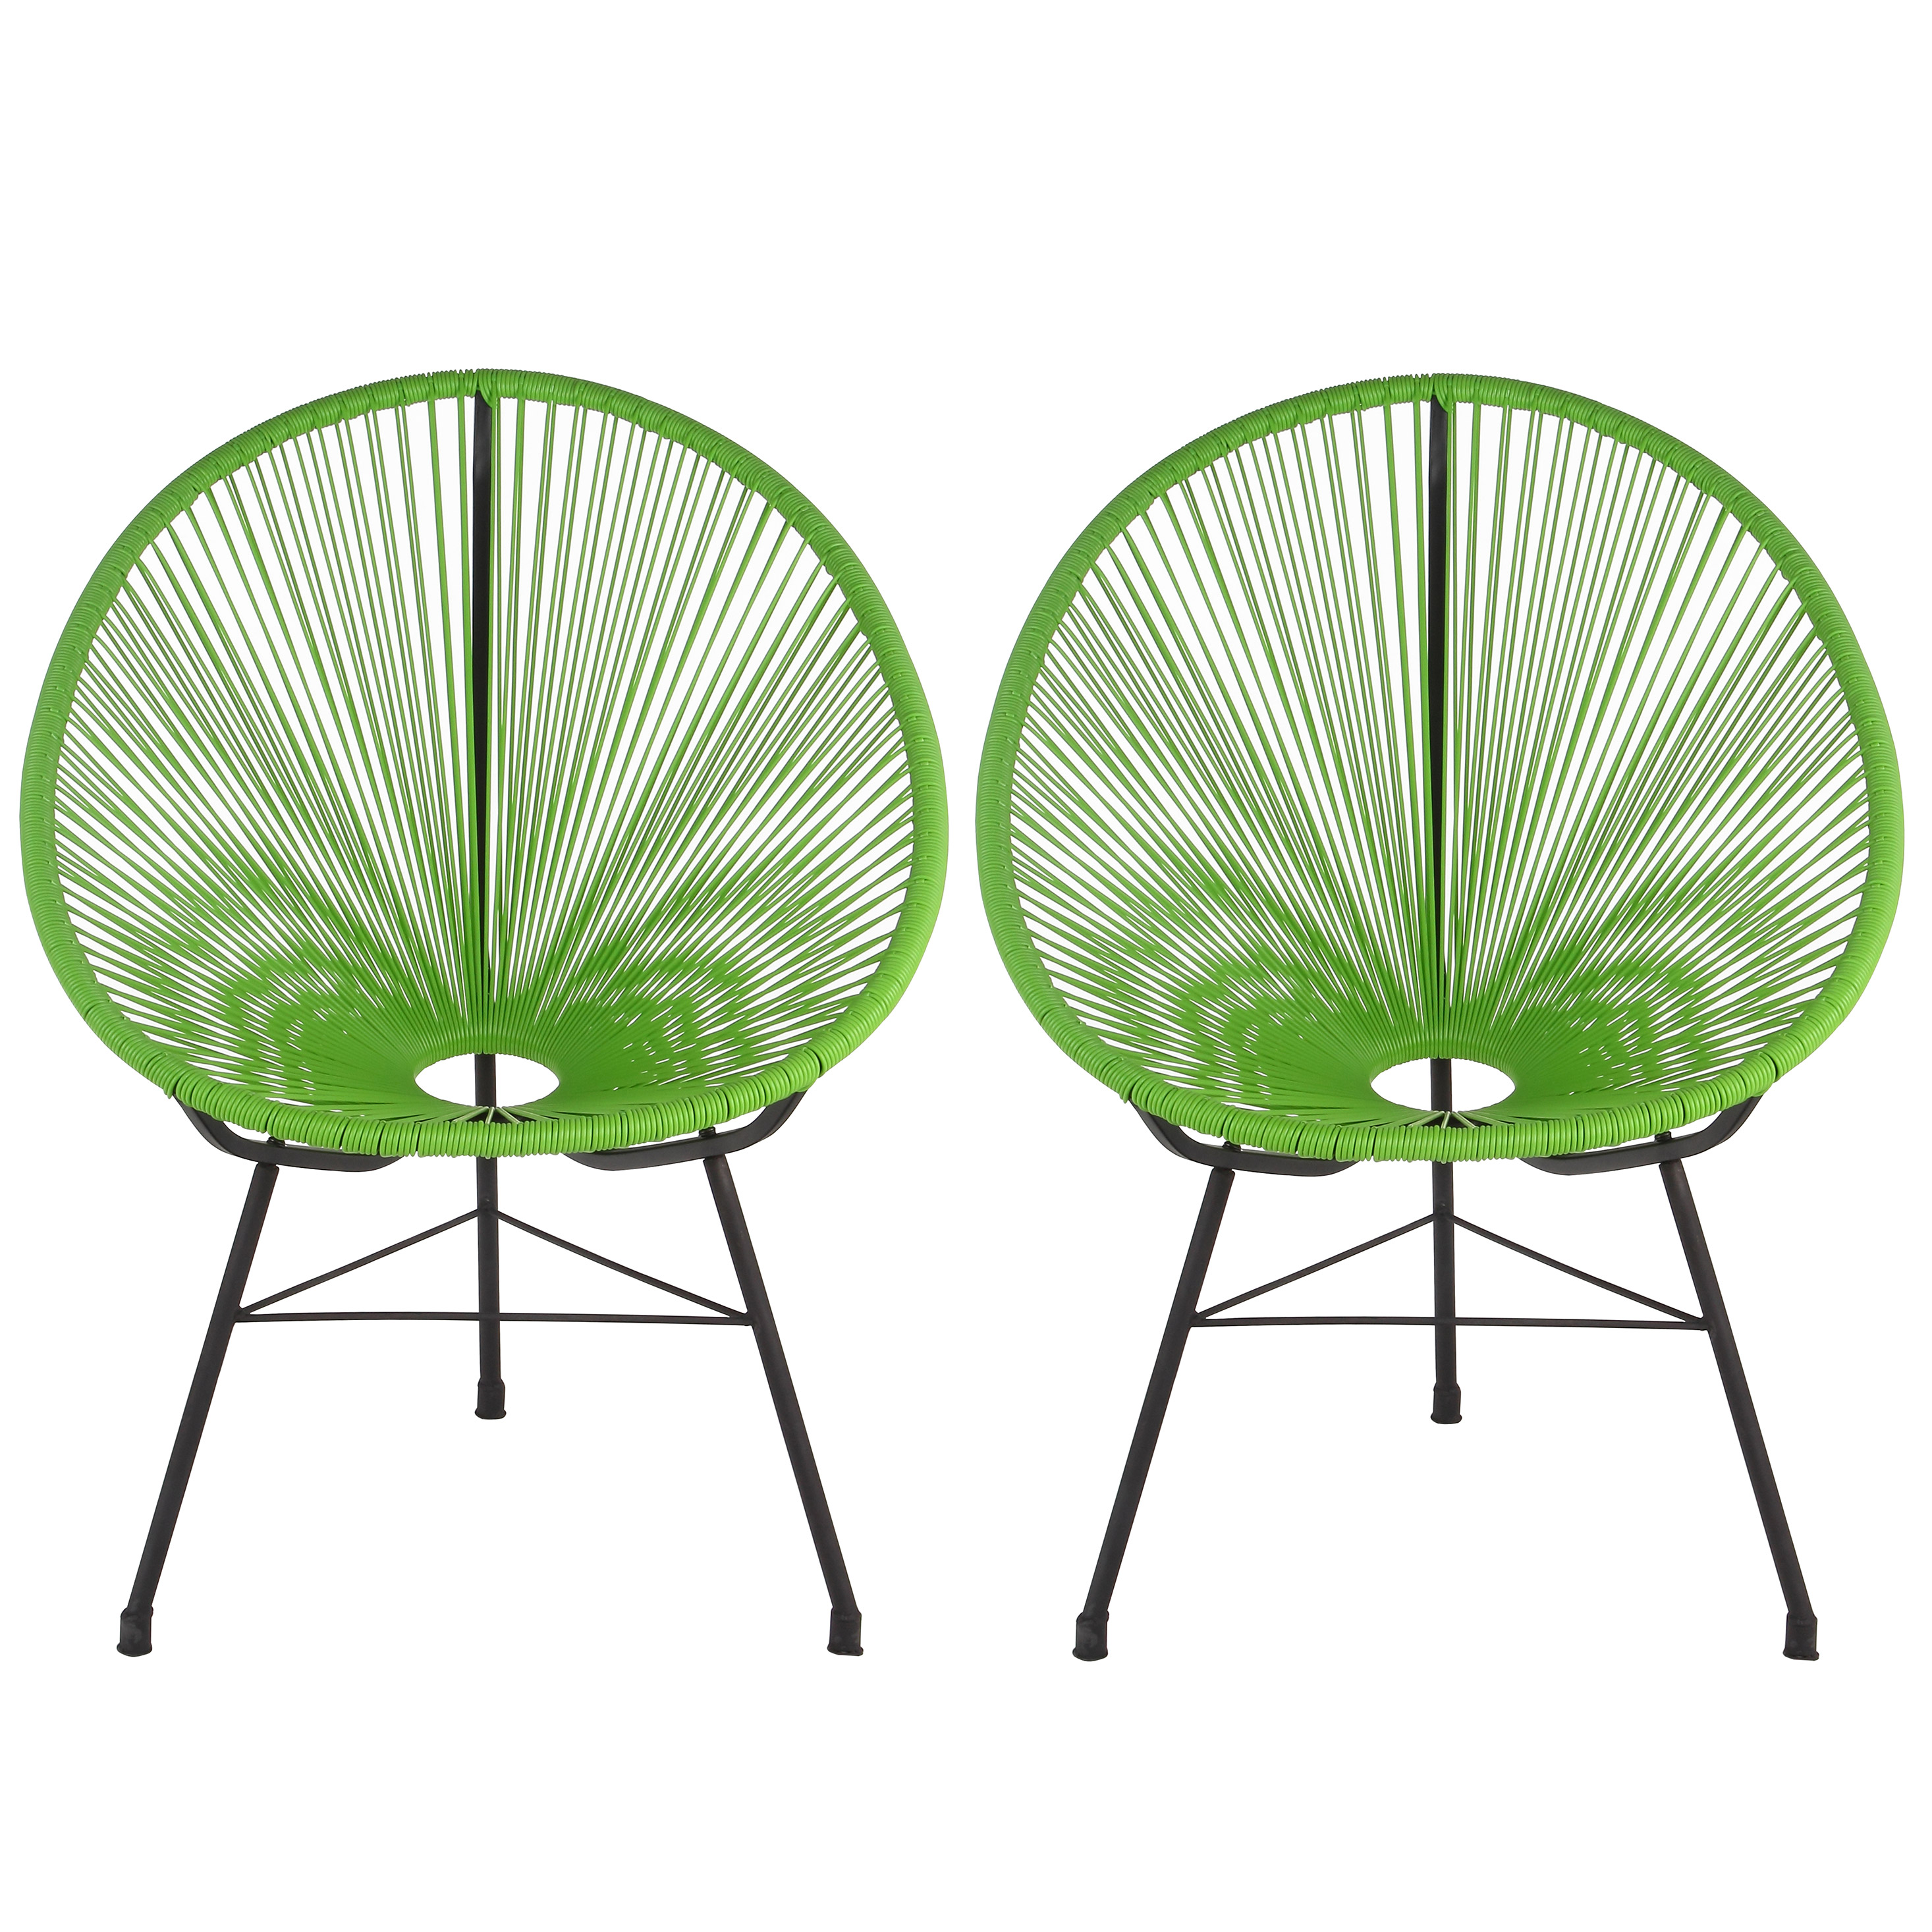 Acapulco Lounge Chair, Green, Set of 2 - image 1 of 3